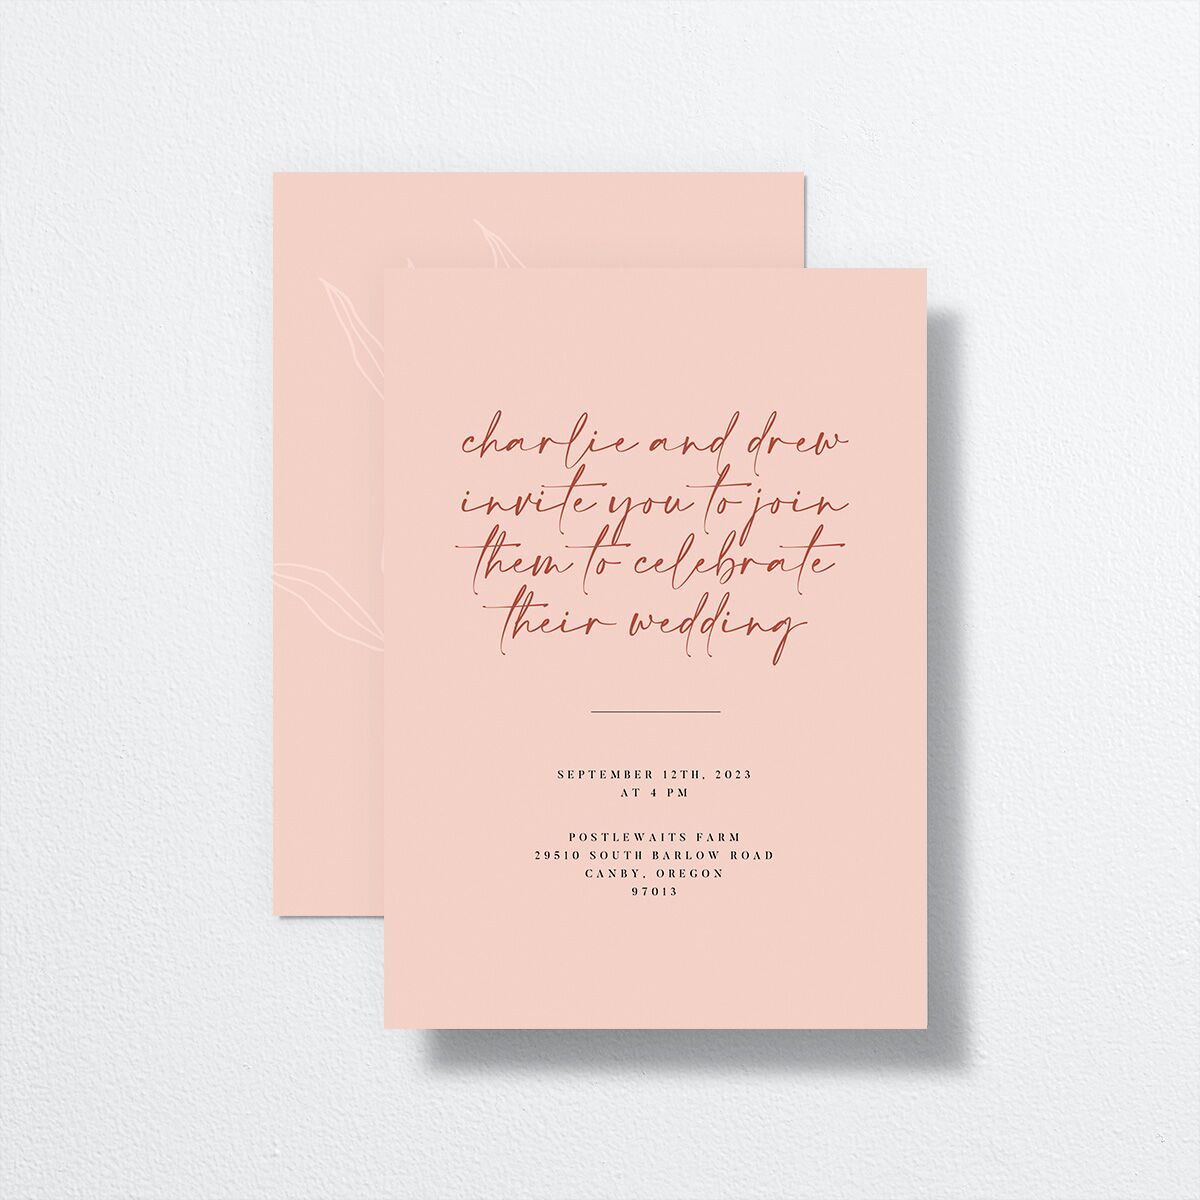 Romantic Bohemian Wedding Invitations front-and-back